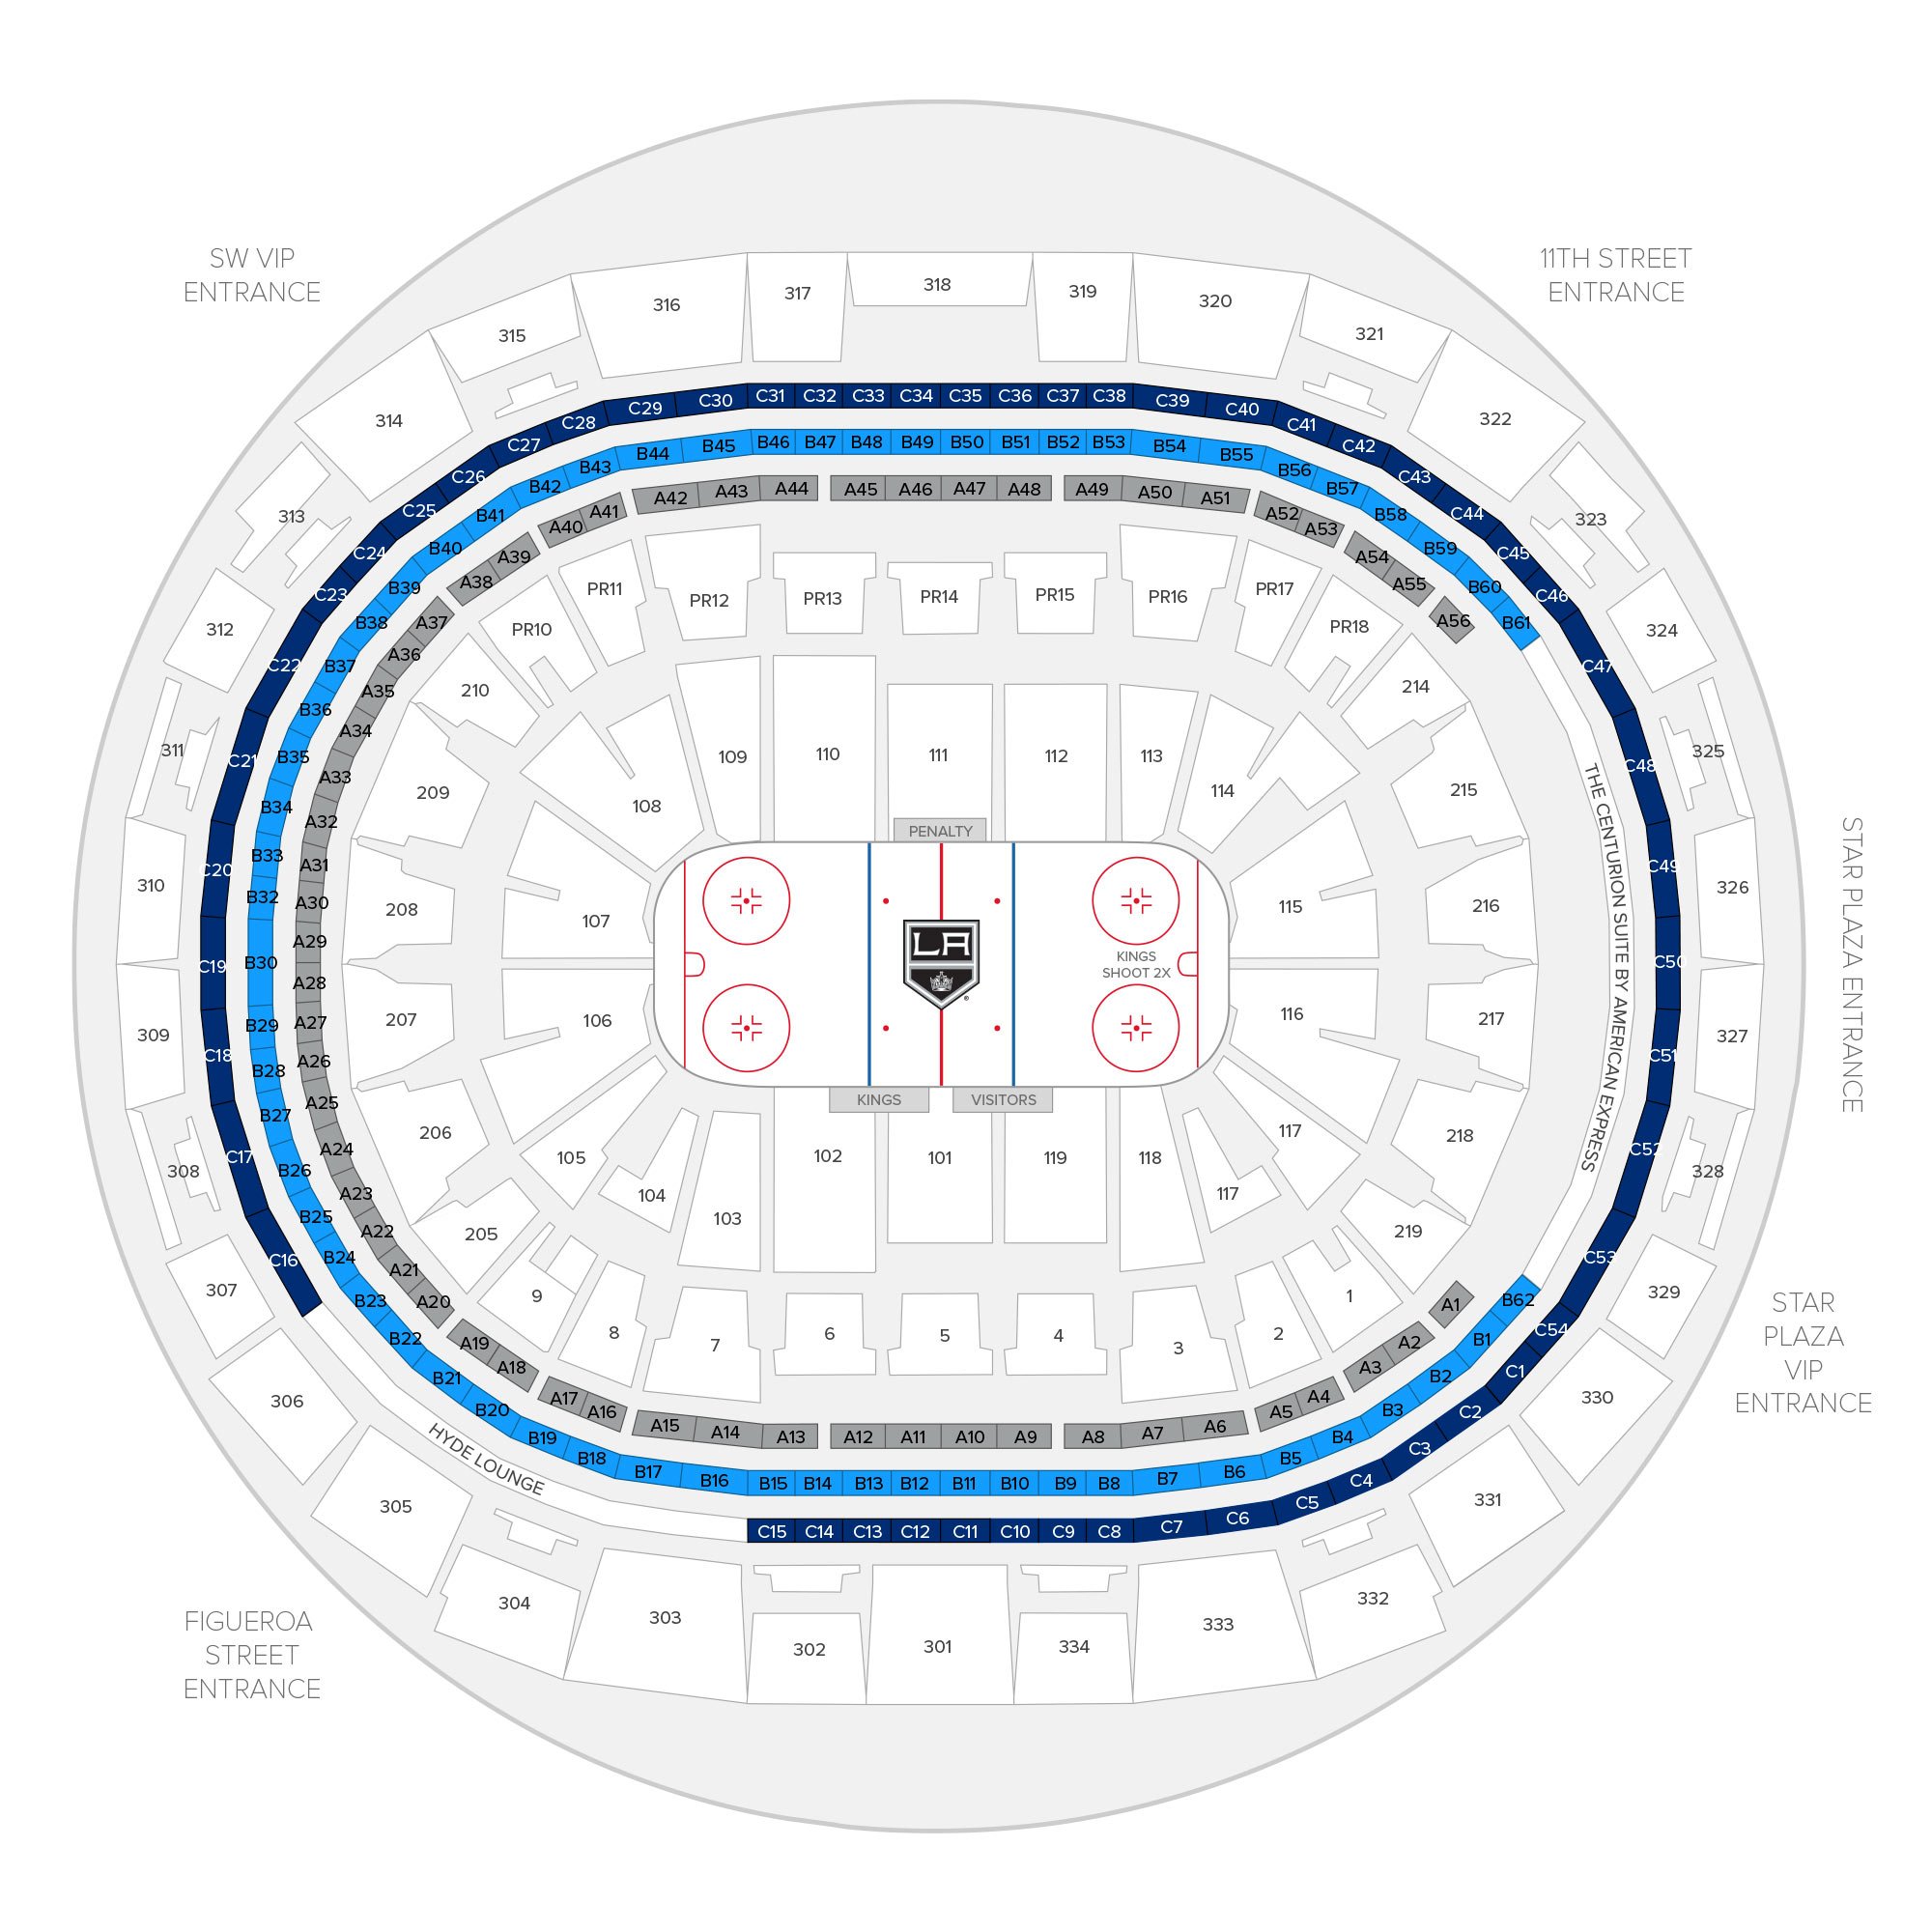 Crypto.com Arena (Formerly Staples Center) / Los Angeles Kings Suite Map and Seating Chart